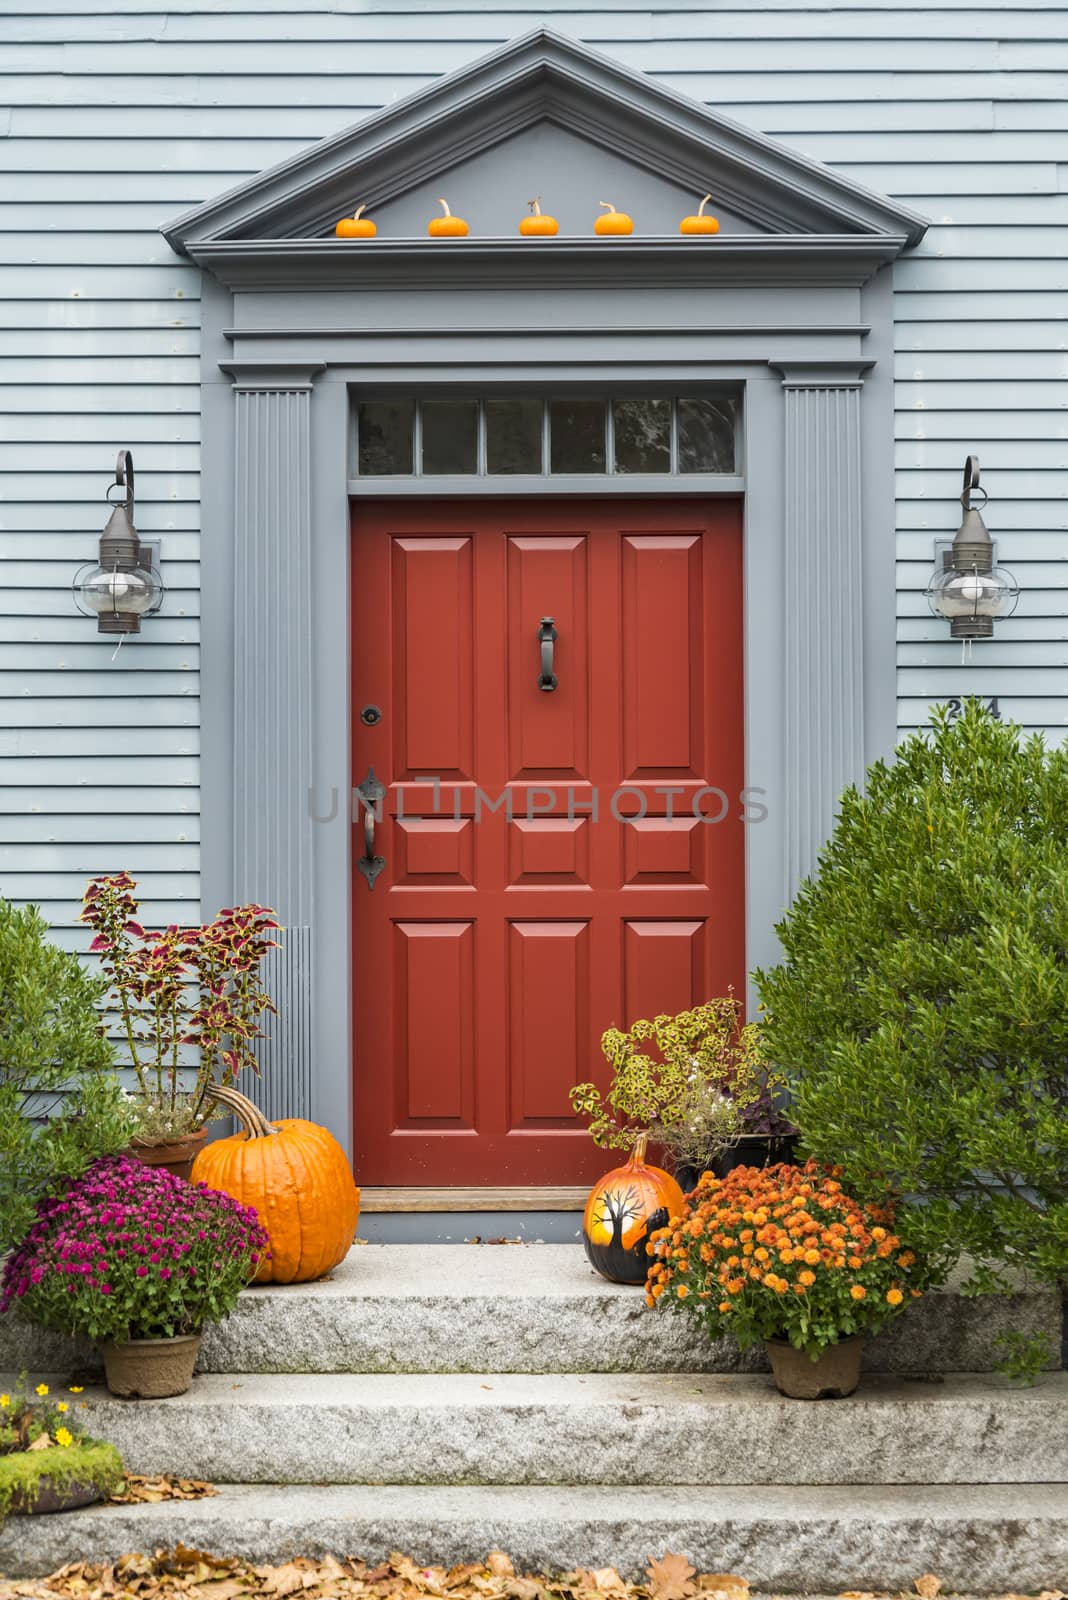 Door of a typical New England residential house by edella